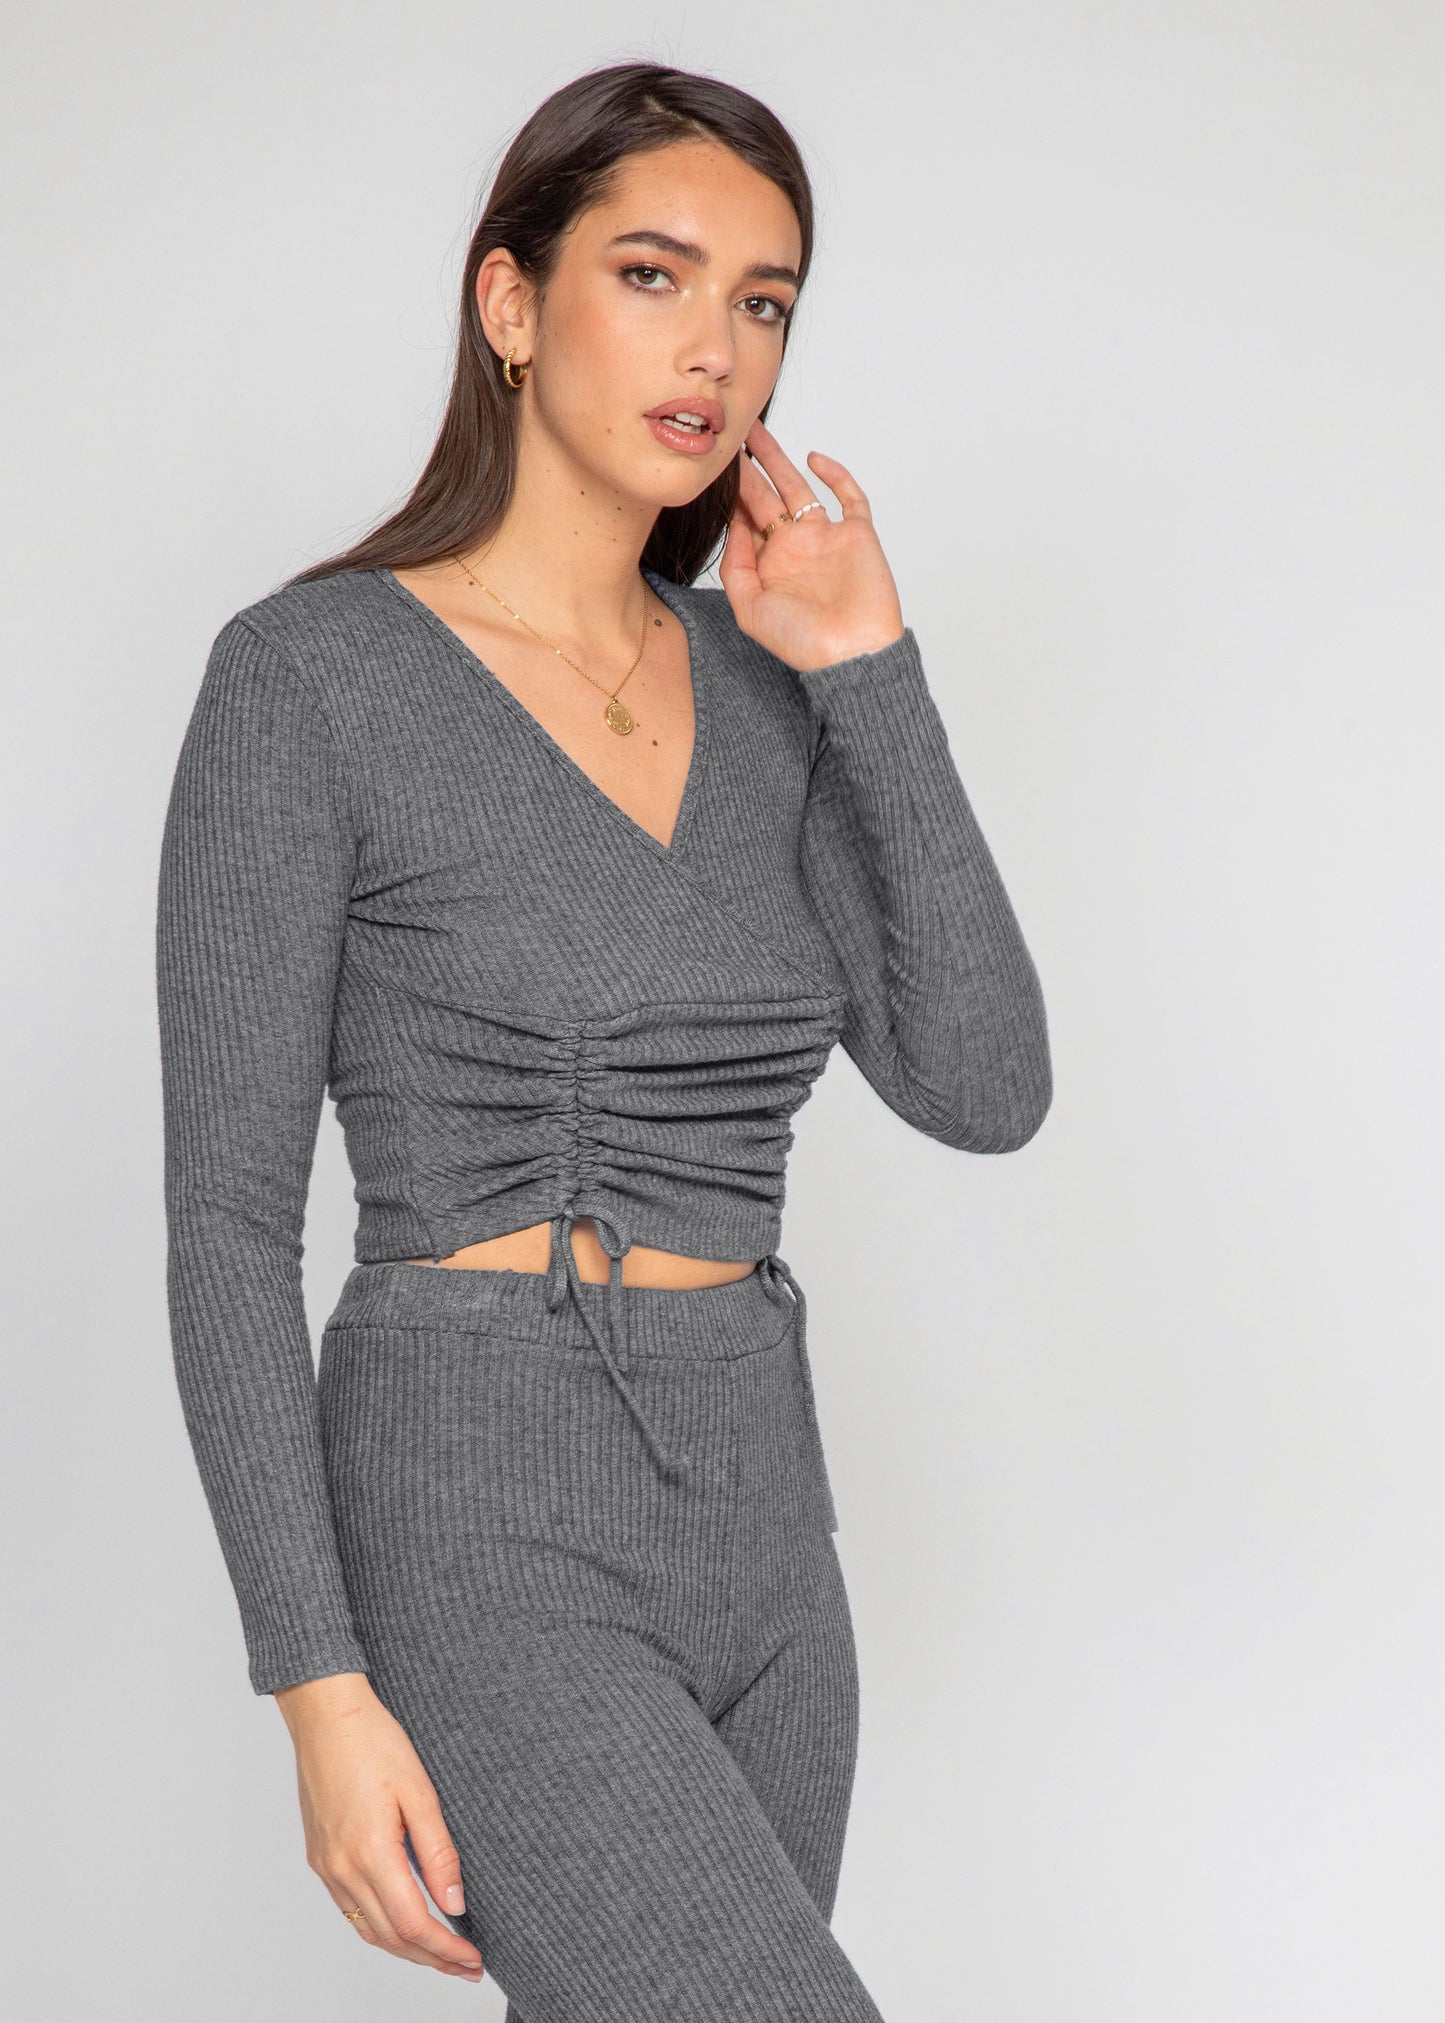 Ribbed wide leg trouser in grey